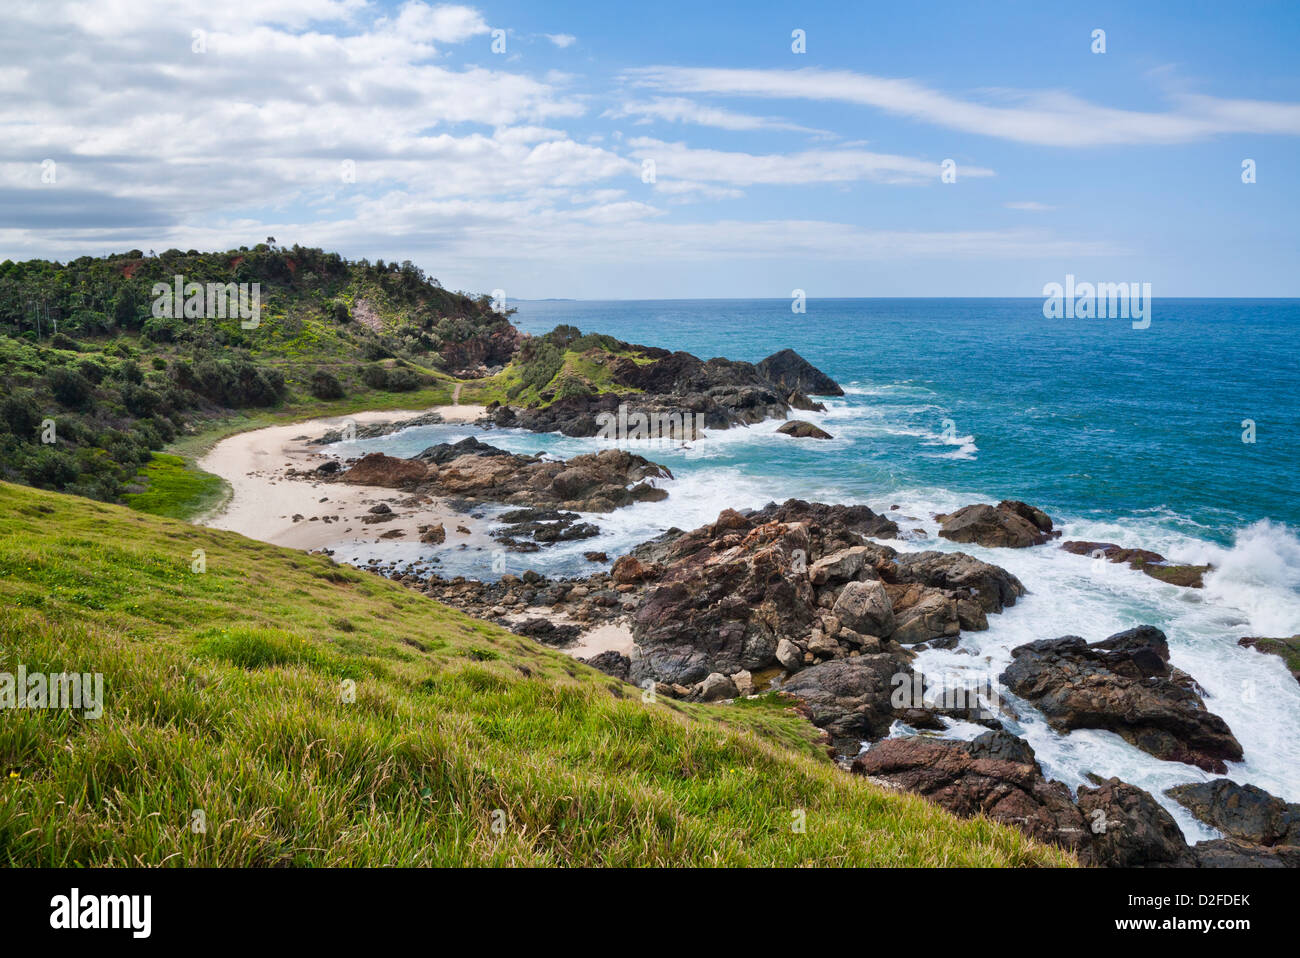 Australia, New South Wales, mid-North Coast, Port Macquarie, Miners Beach seen from Tacking Point Lighthouse Stock Photo